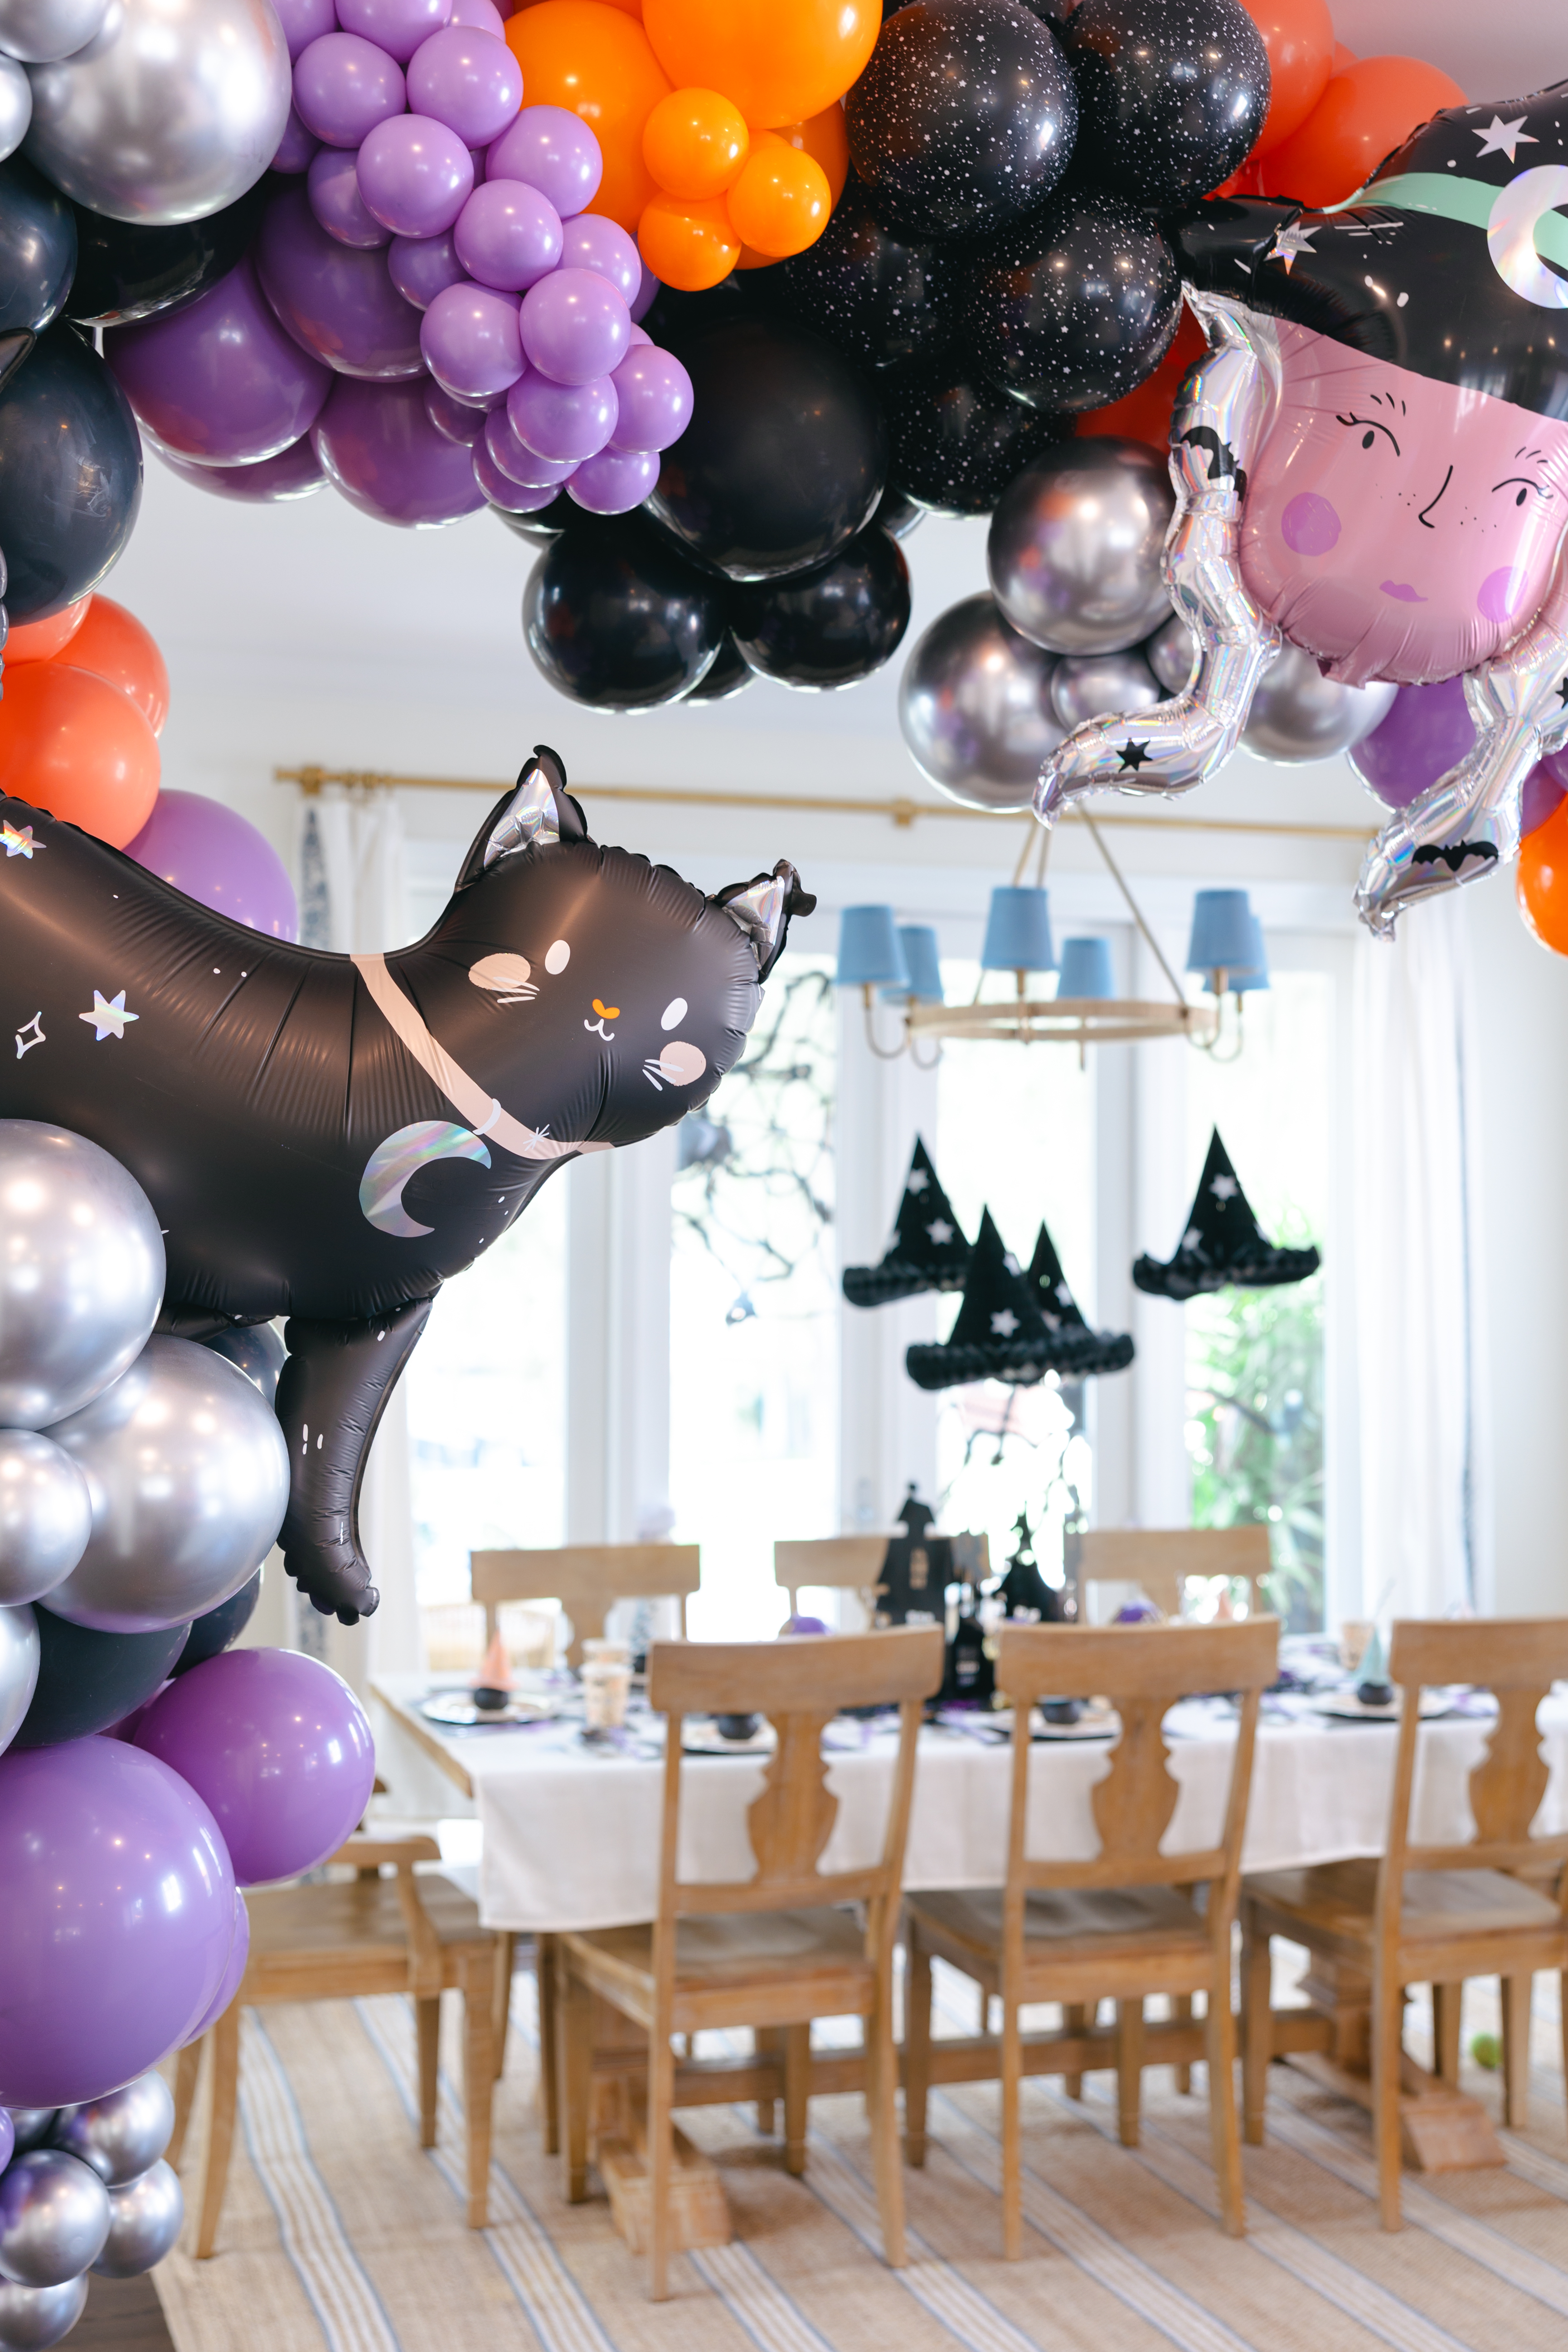 Balloon arch with purple, orange and black balloons and foil cat and witch balloon.